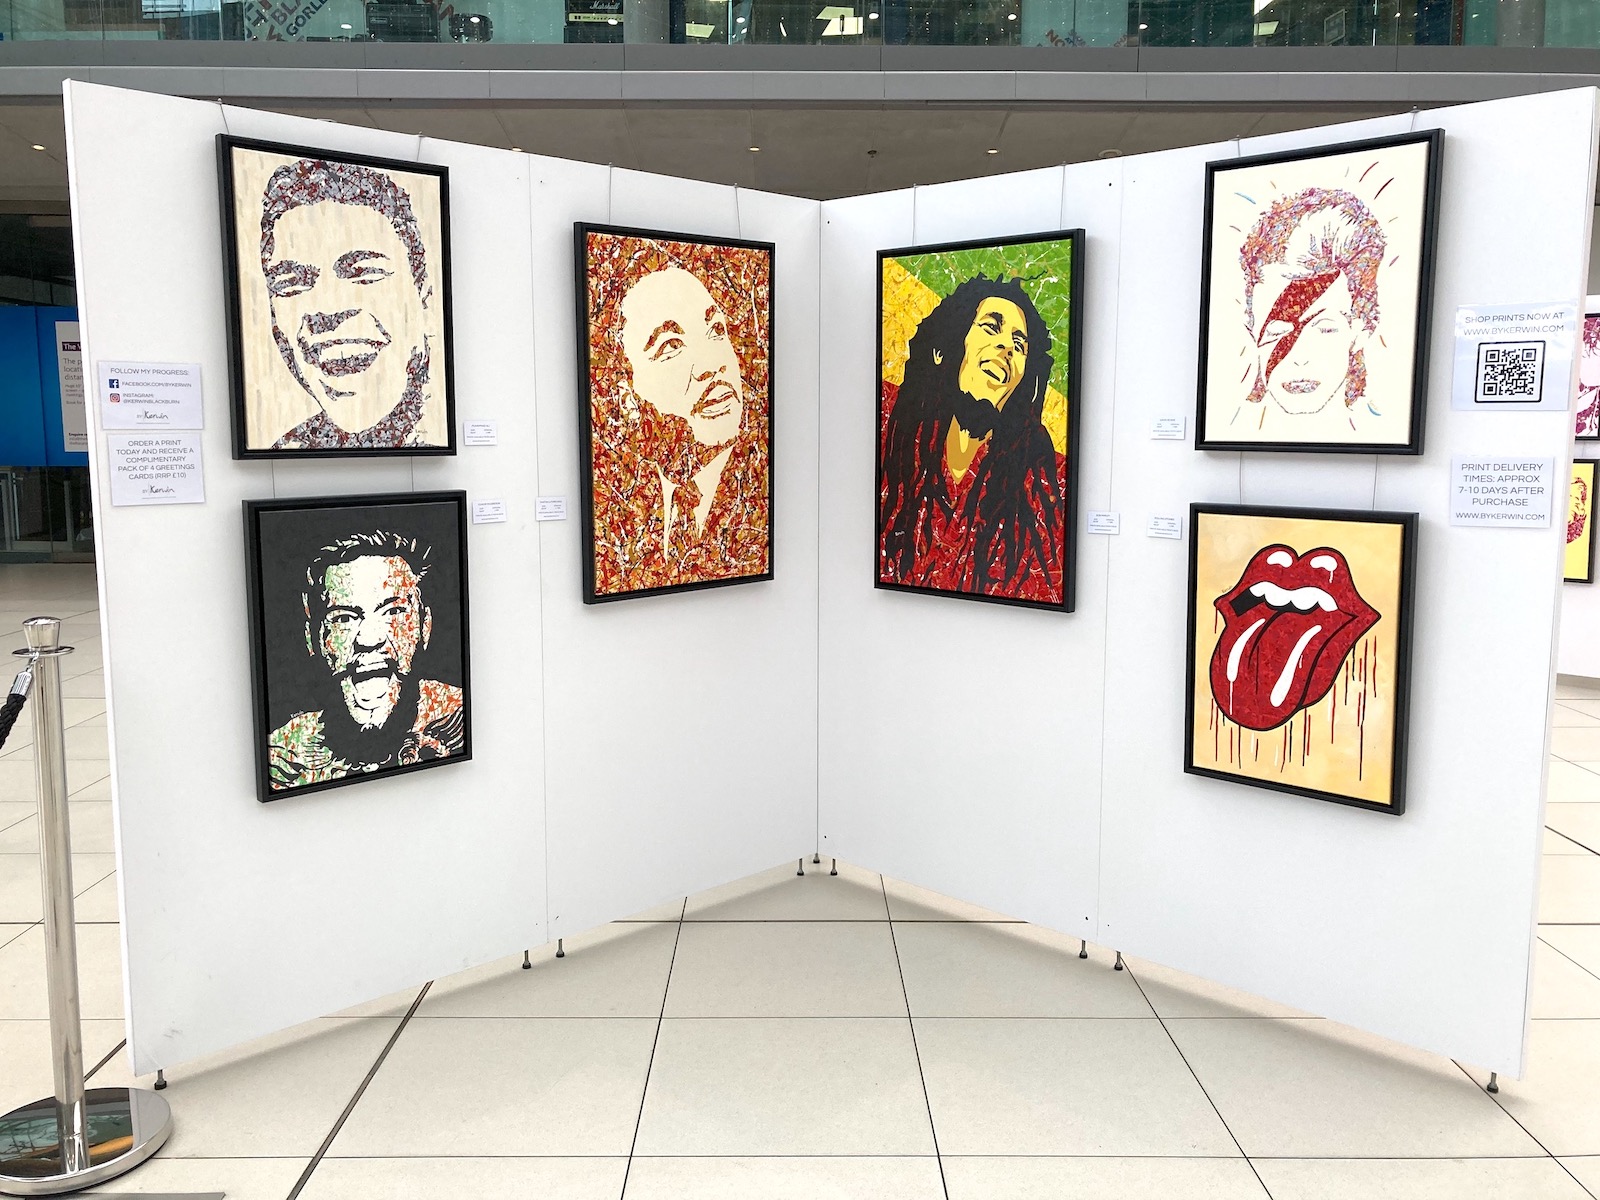 Kerwin Blackburn's Jackson Pollock-inspired pop art music paintings on display in his debut art exhibition at The Forum, Norwich December 2020 | By Kerwin prints | Martin Luther King | Bob Marley | David Bowie | Rolling Stones | Muhammad Ali | Conor McGregor